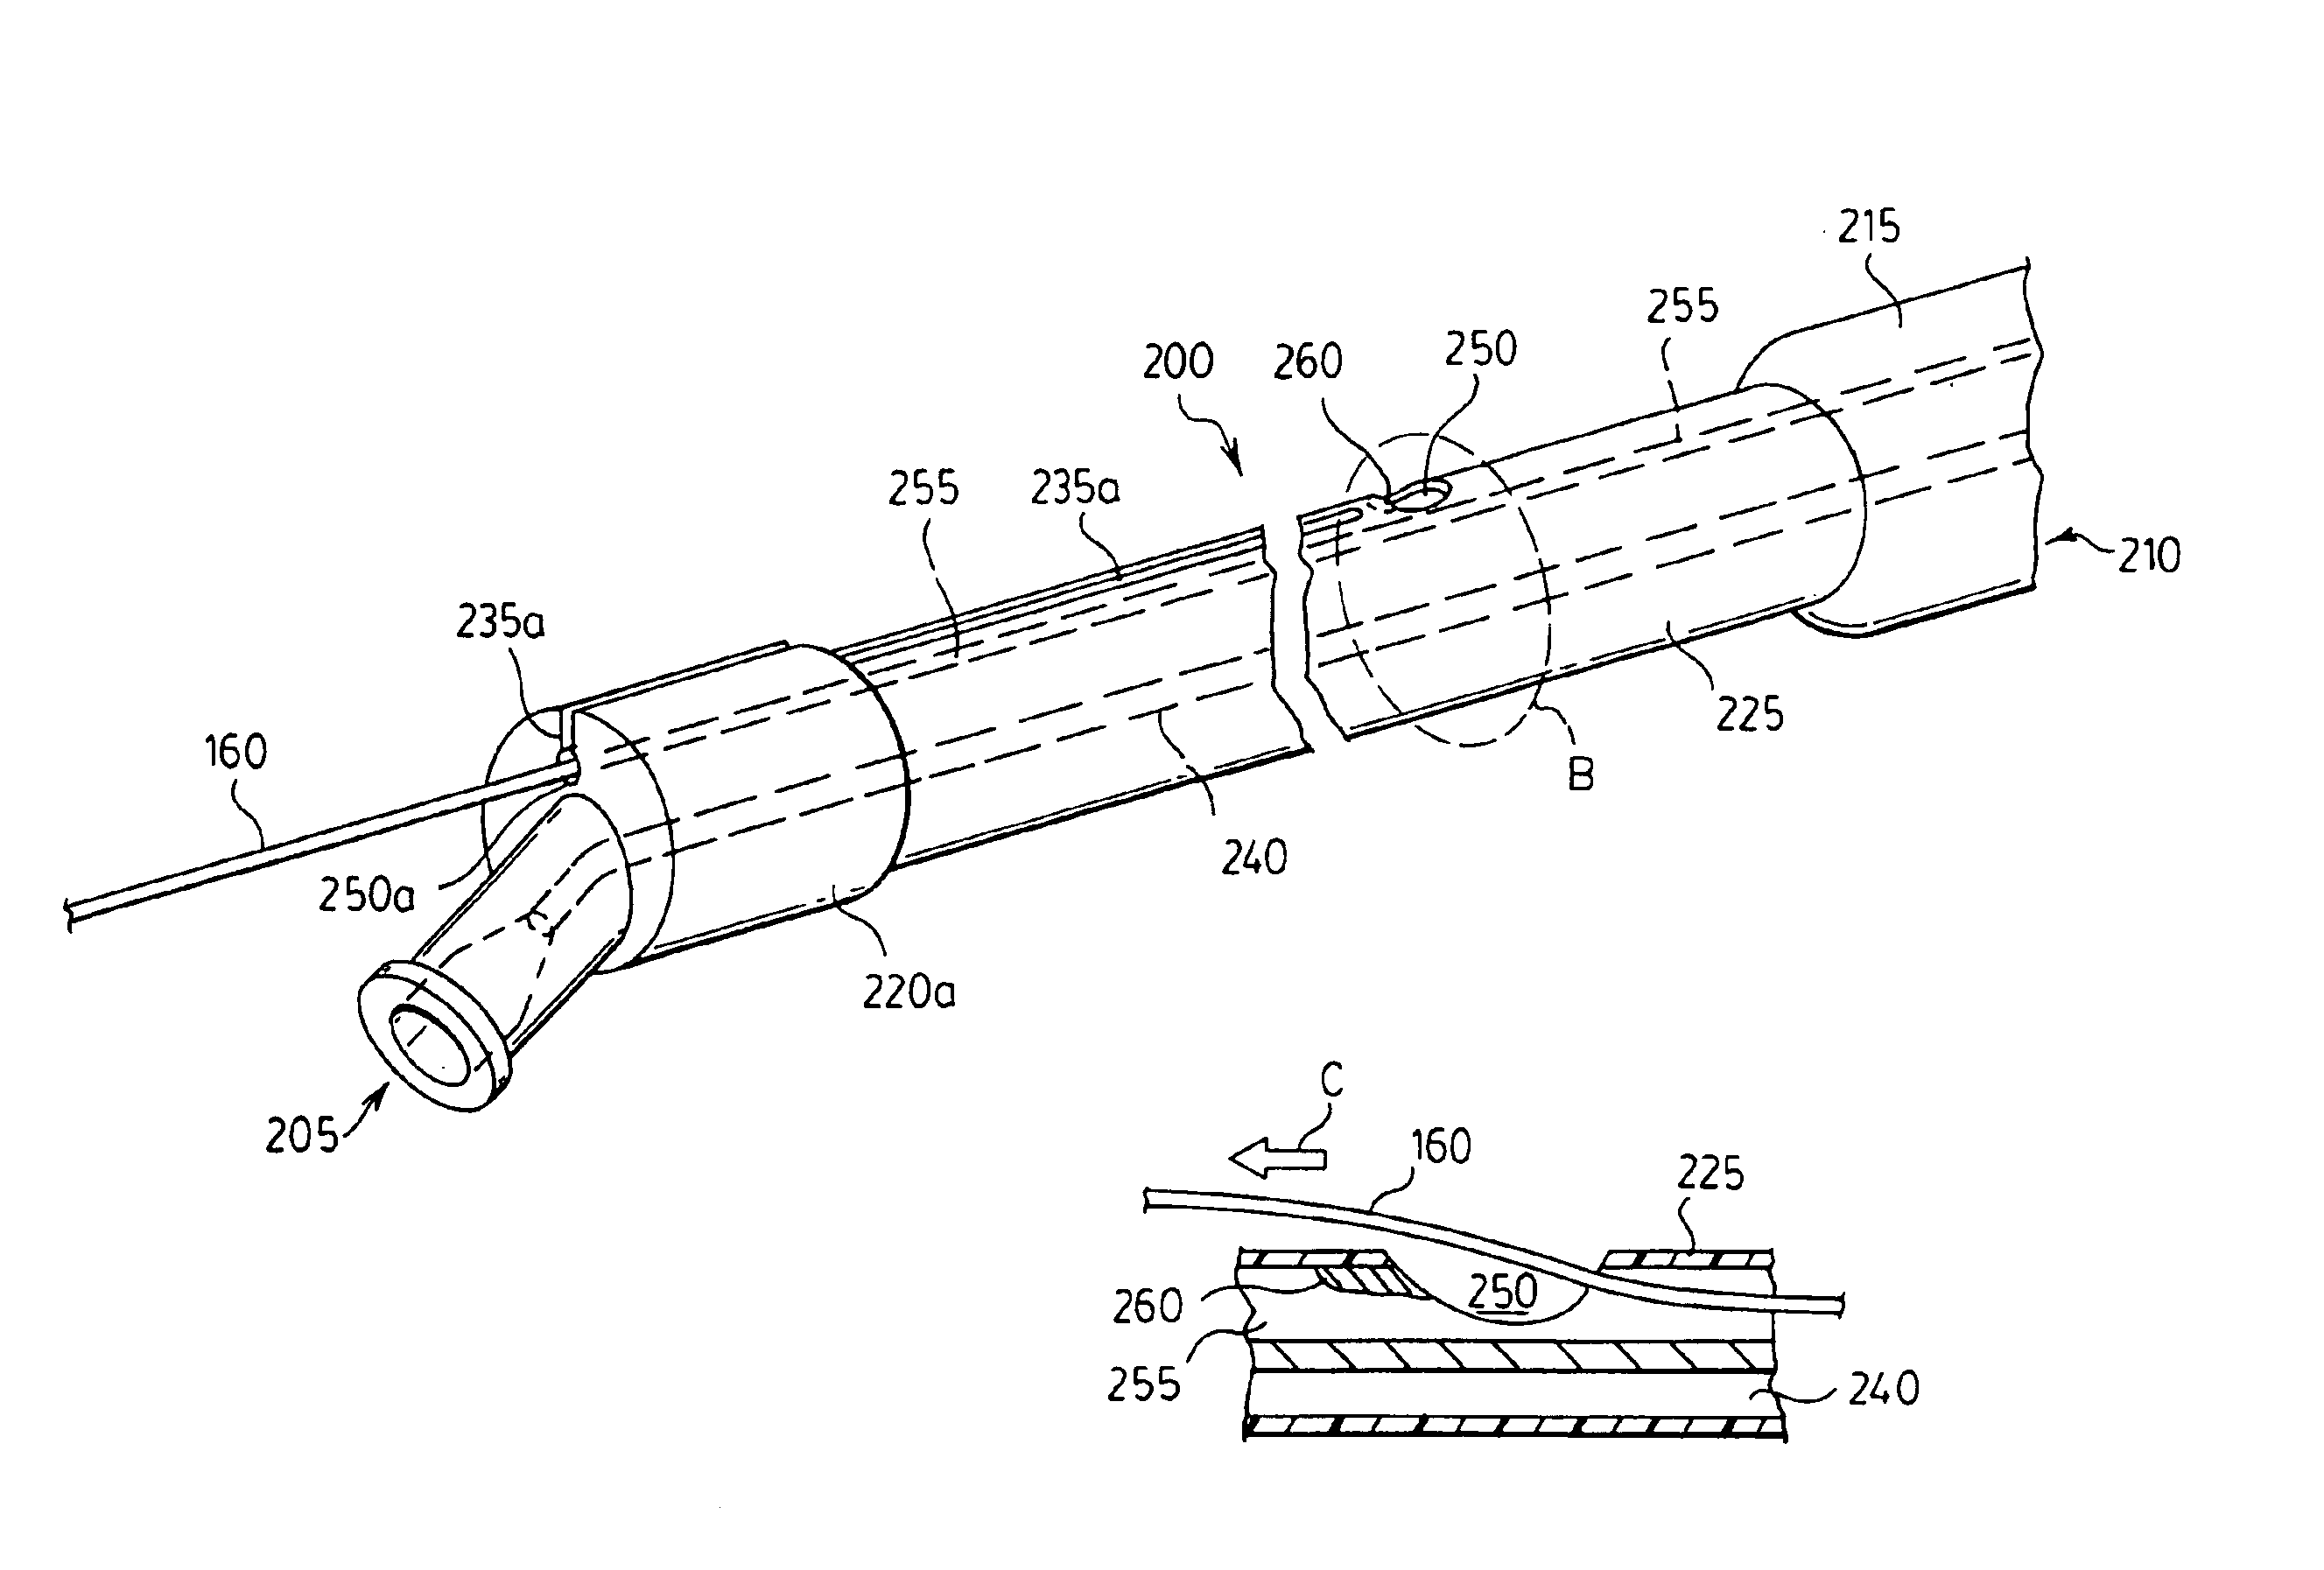 Stent delivery system and method of use